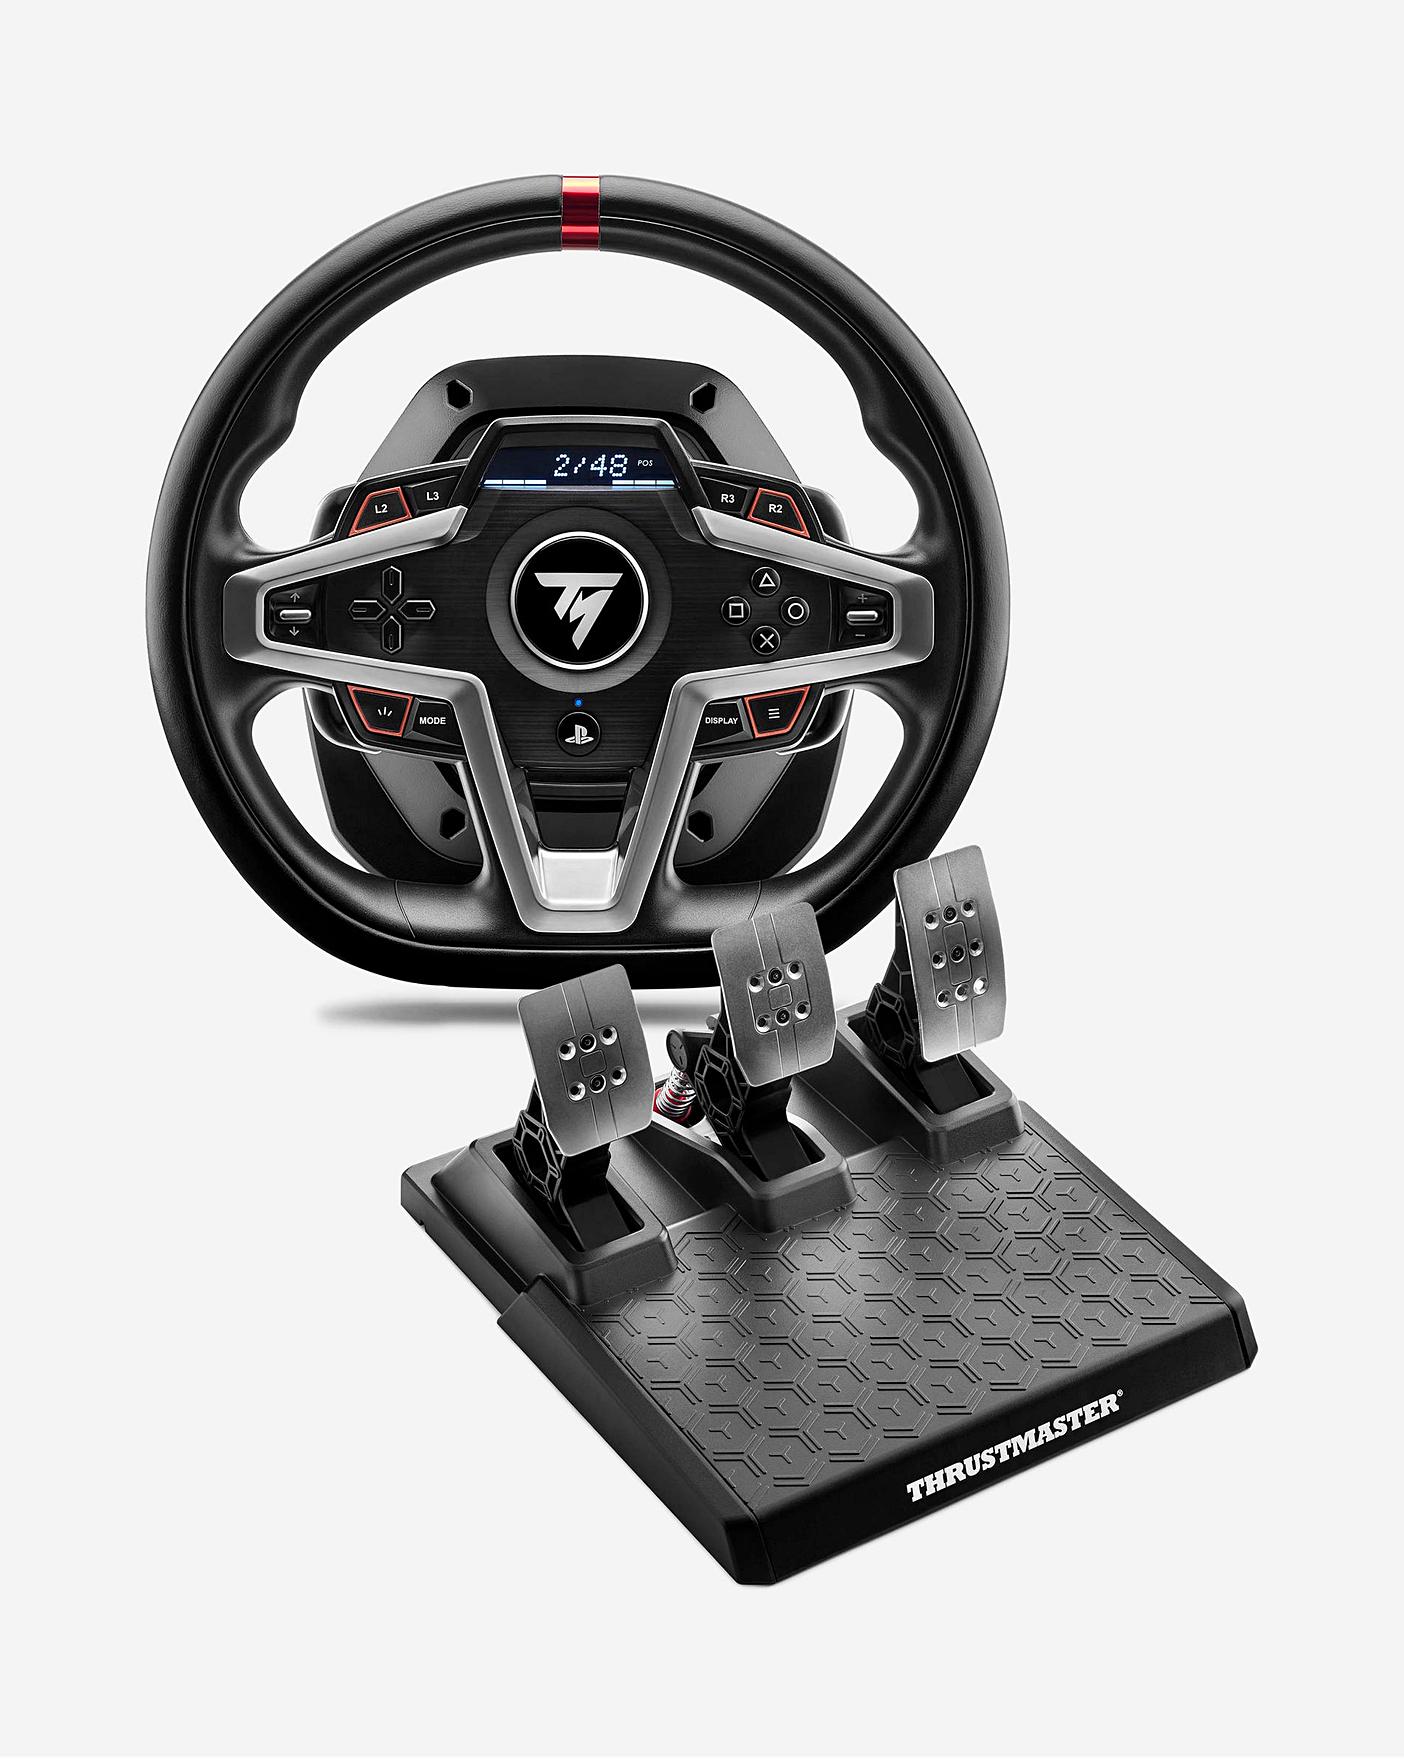 Thrustmaster T248 Racing Wheel Pedals Review, 60% OFF